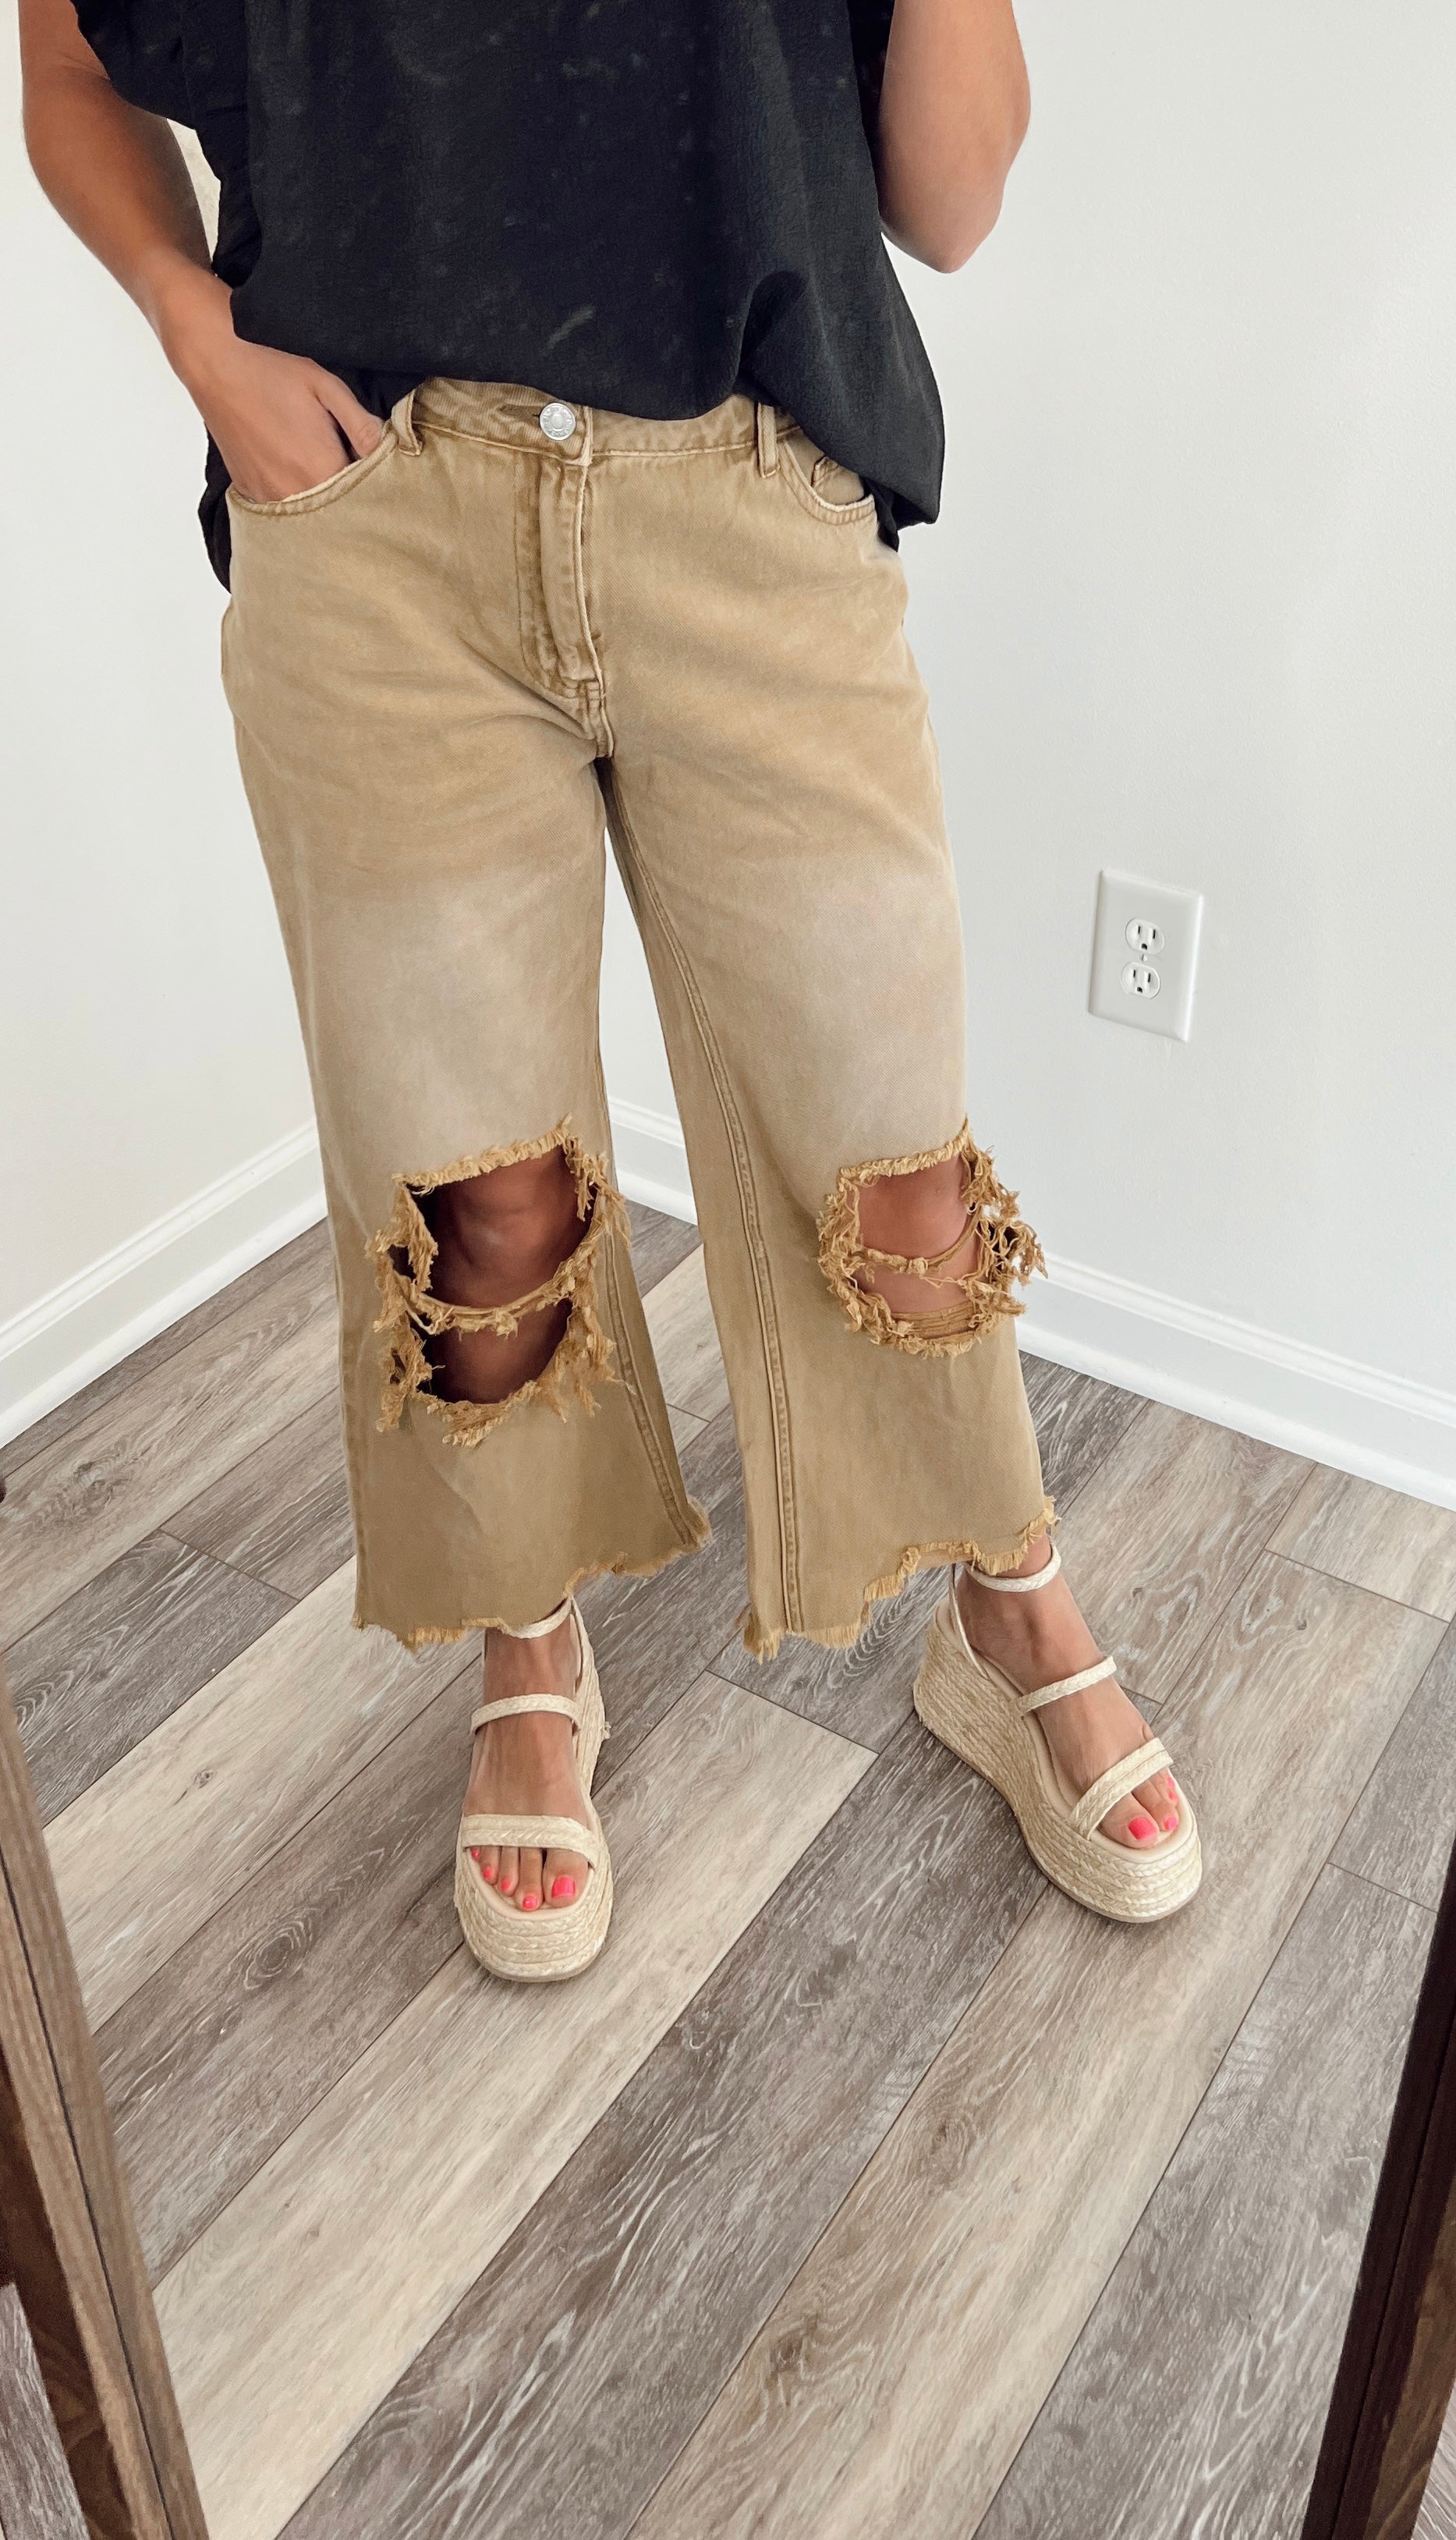 The Vintage Tan Distressed Jeans